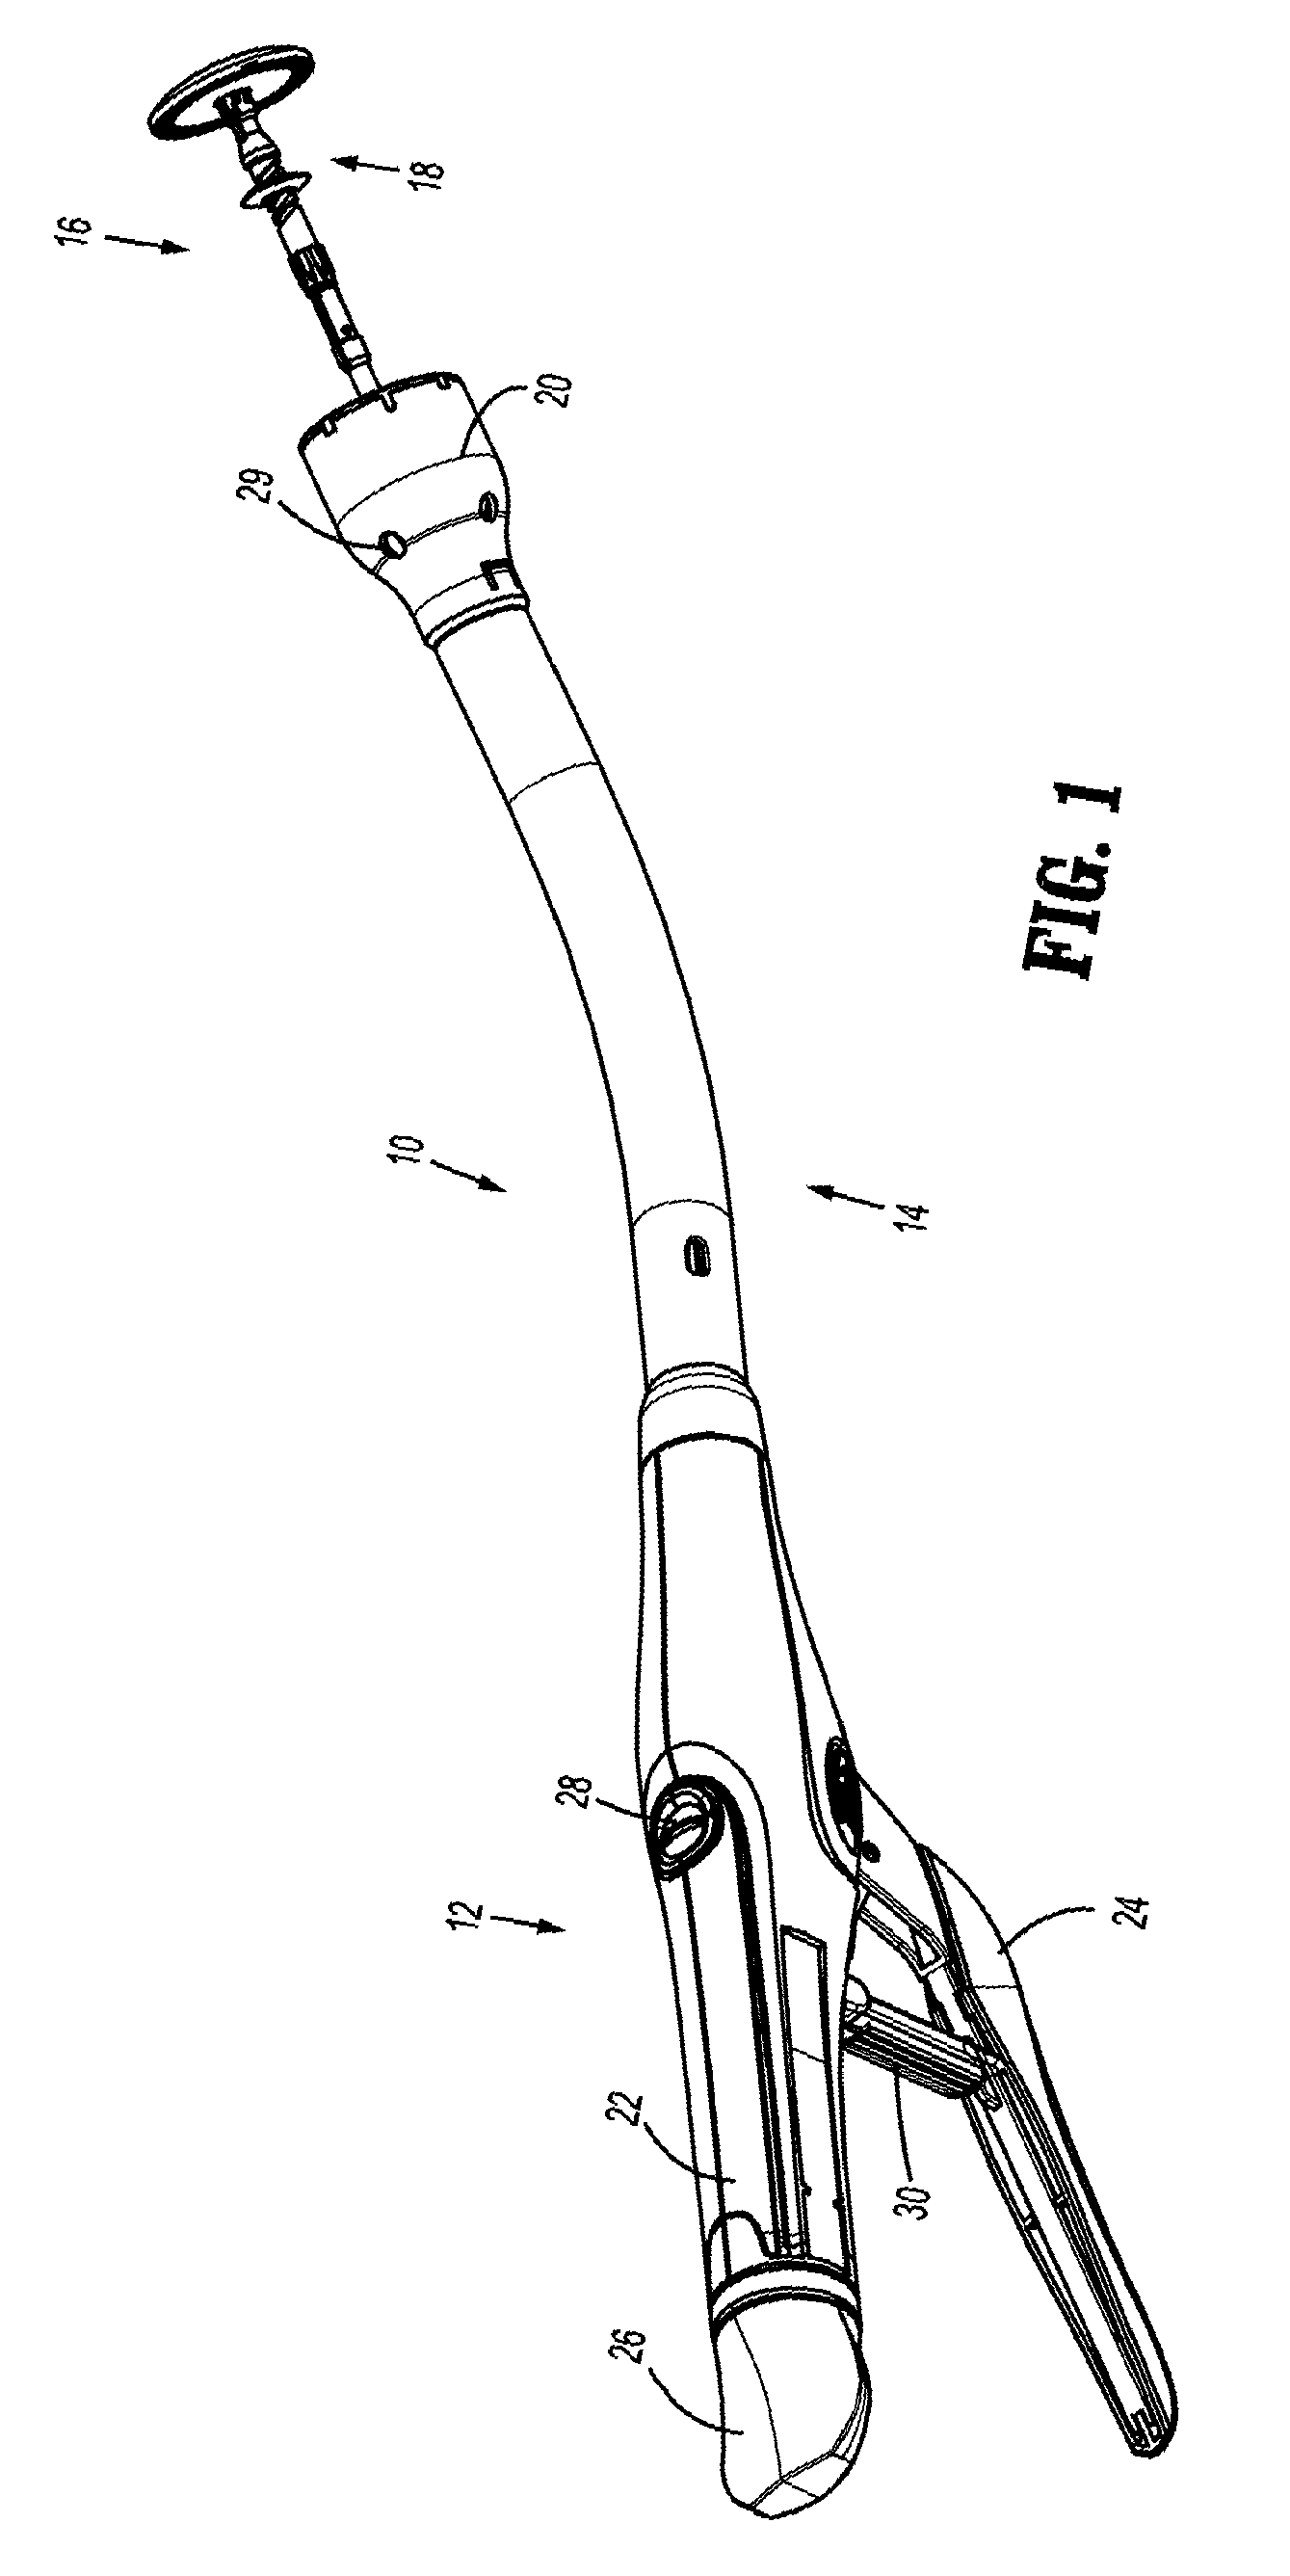 Surgical stapler with suture locator